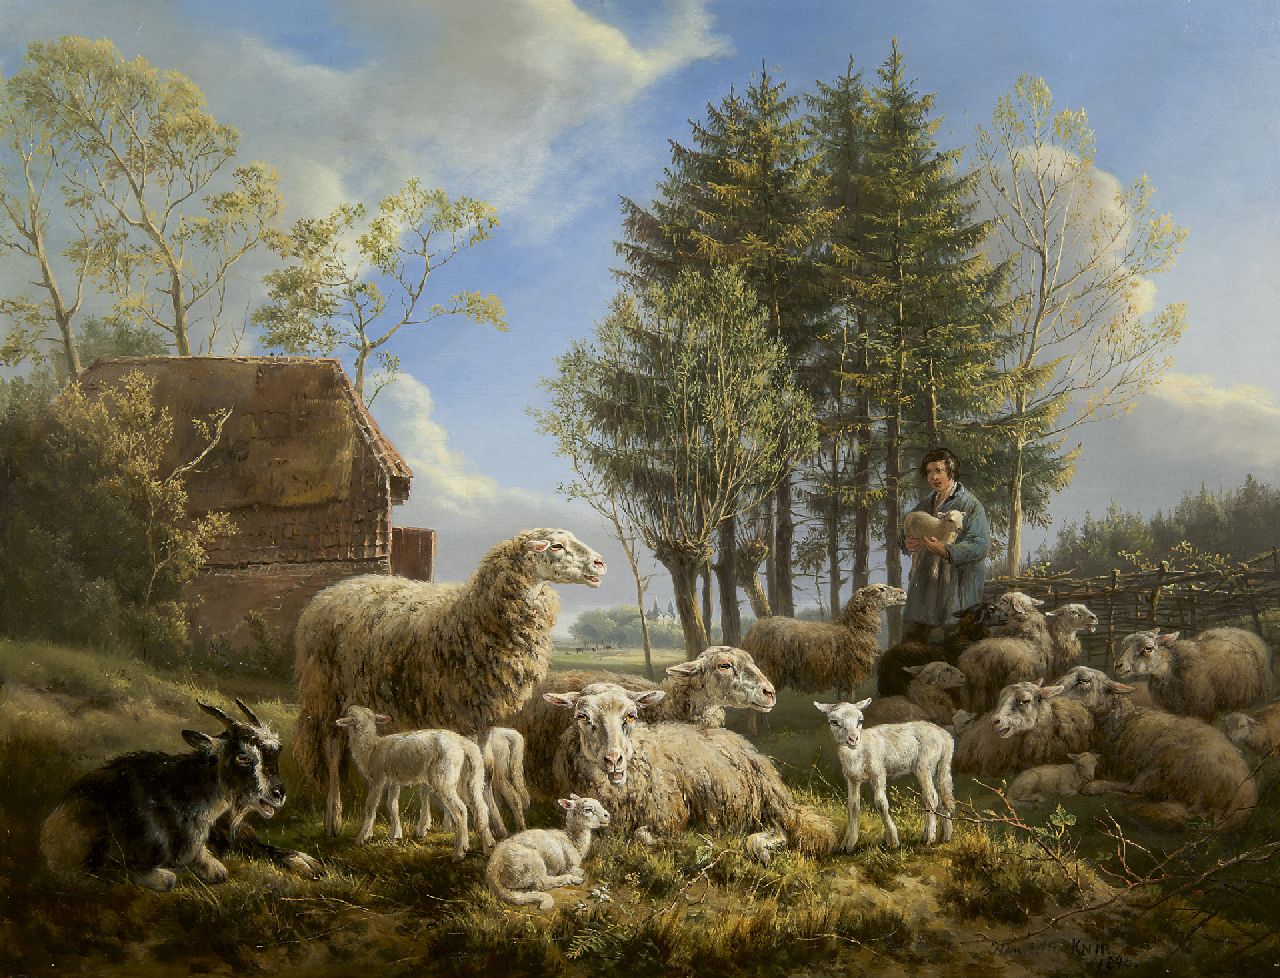 Ronner-Knip H.  | Henriette Ronner-Knip, Sheep with a shepherd in a landscape, oil on panel 46.3 x 60.1 cm, signed l.r. and dated 1840